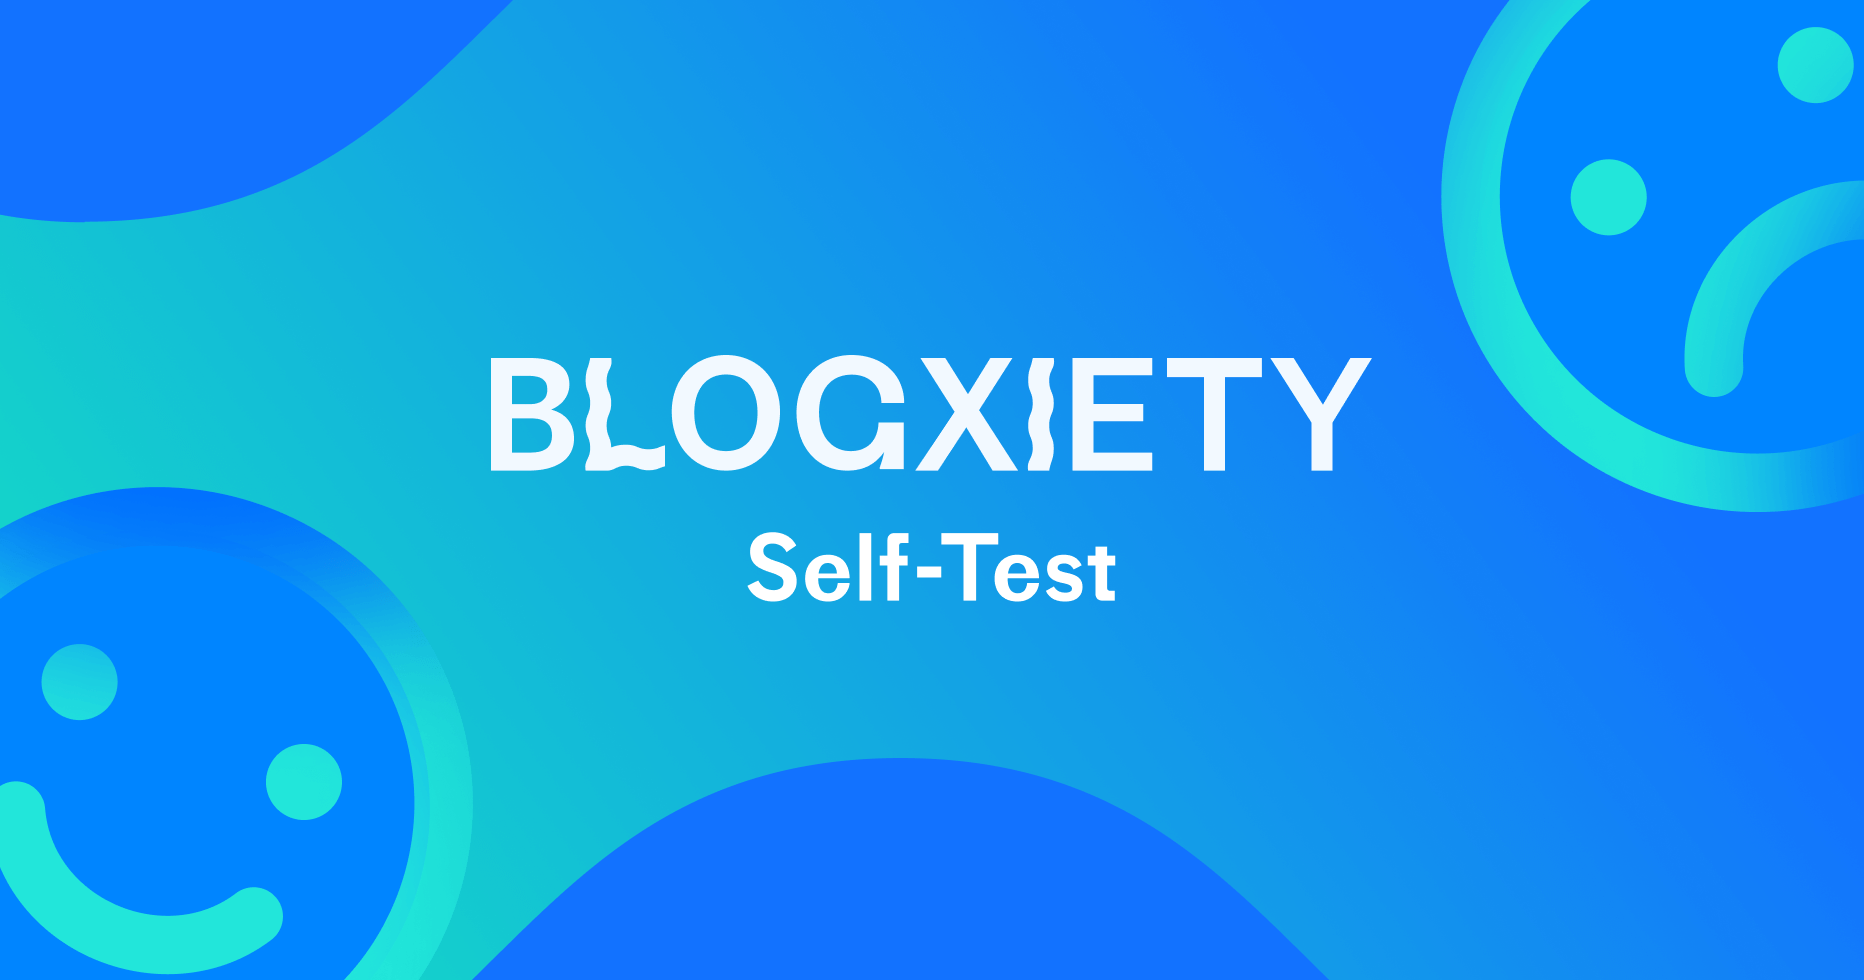 Blogxiety Self-Test: How Do You Know You’re Burning Out?